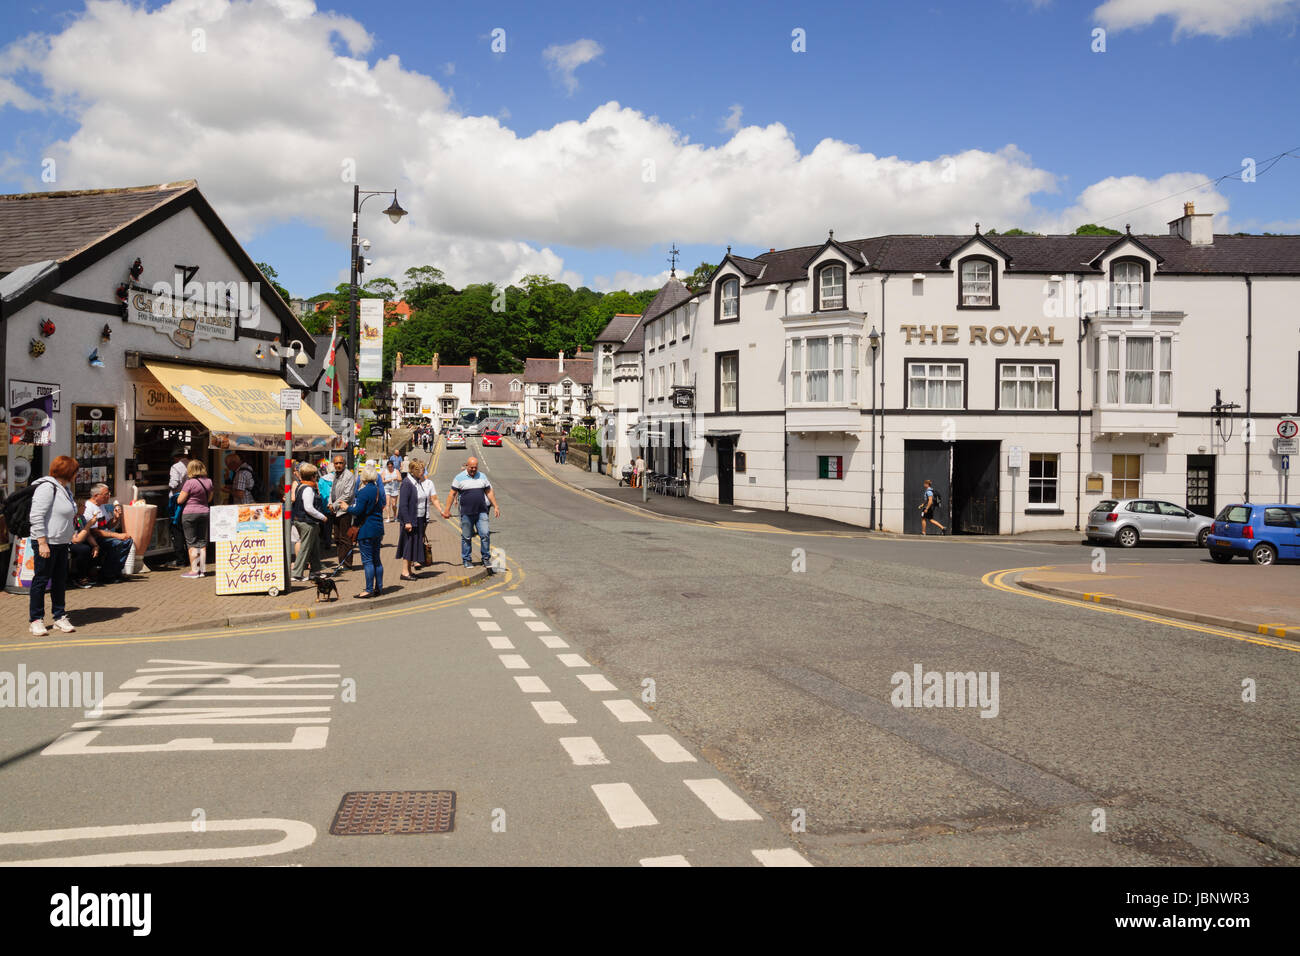 Castle street in Llangollen with the Royal Hotel and bridge over the River Dee Stock Photo